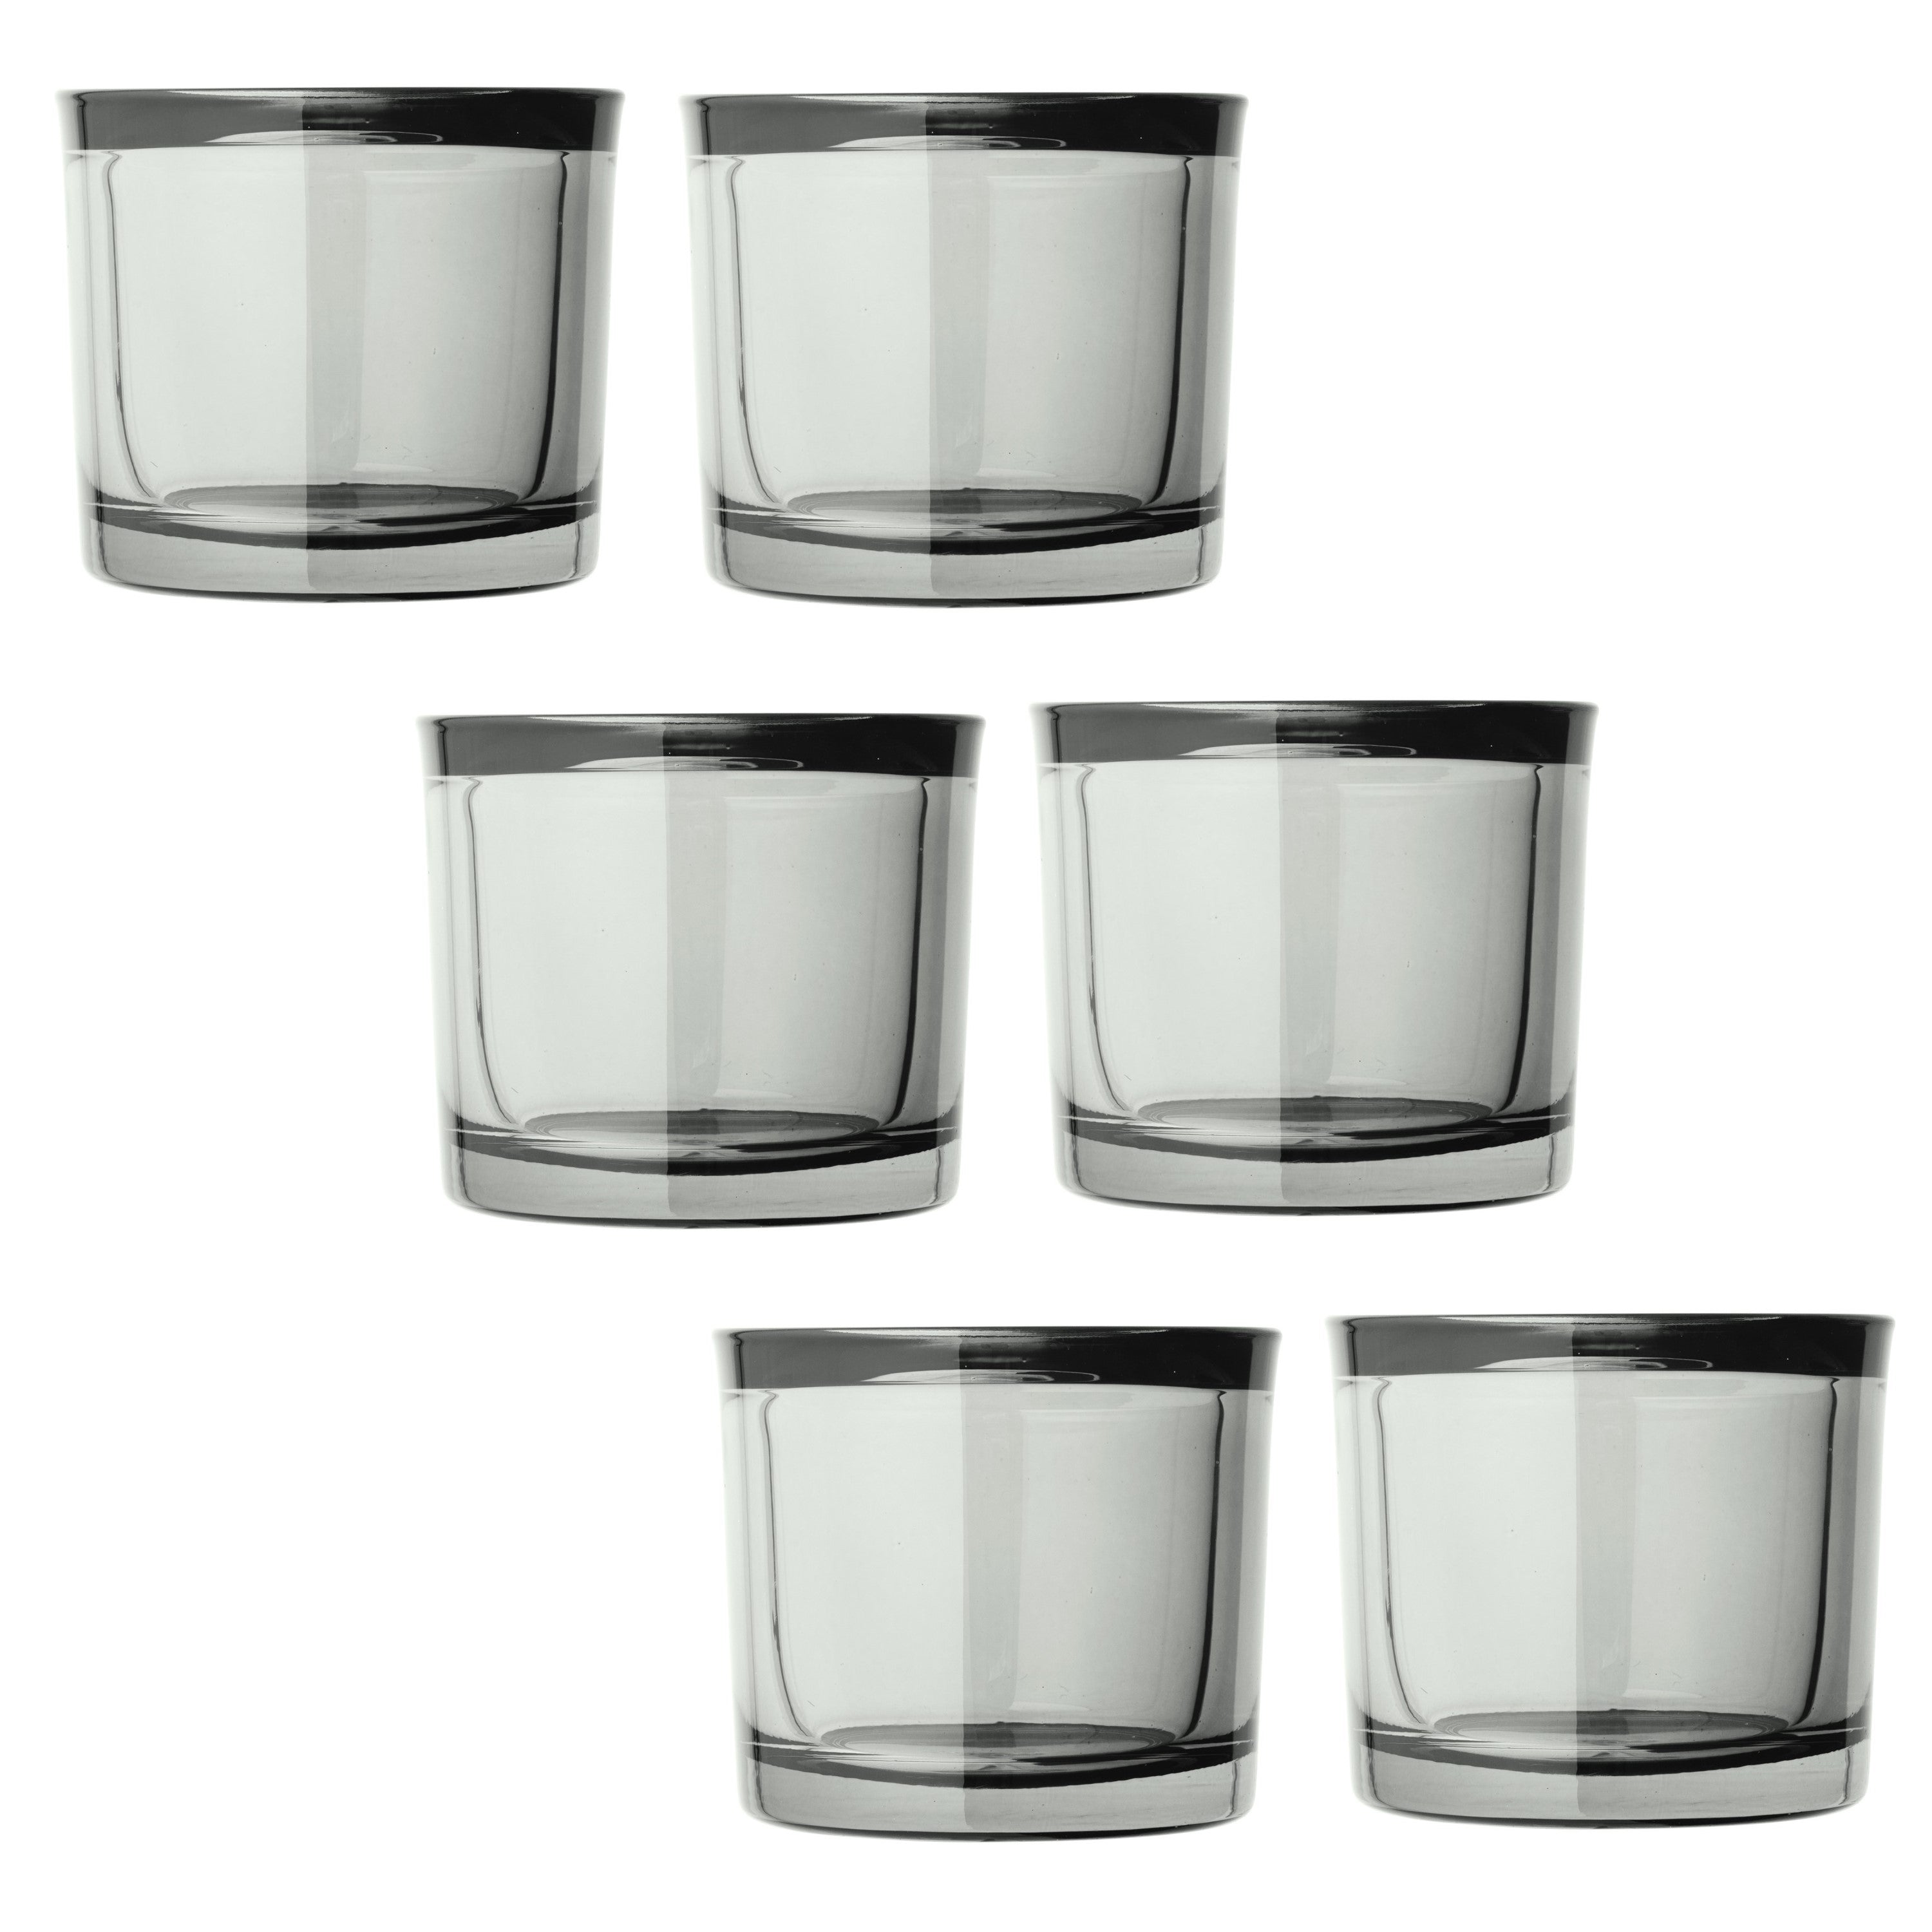 Blomus Tealight Candle Holder: Smoky-Grey Tinted Glass MIMO 8x9cm Set of 6